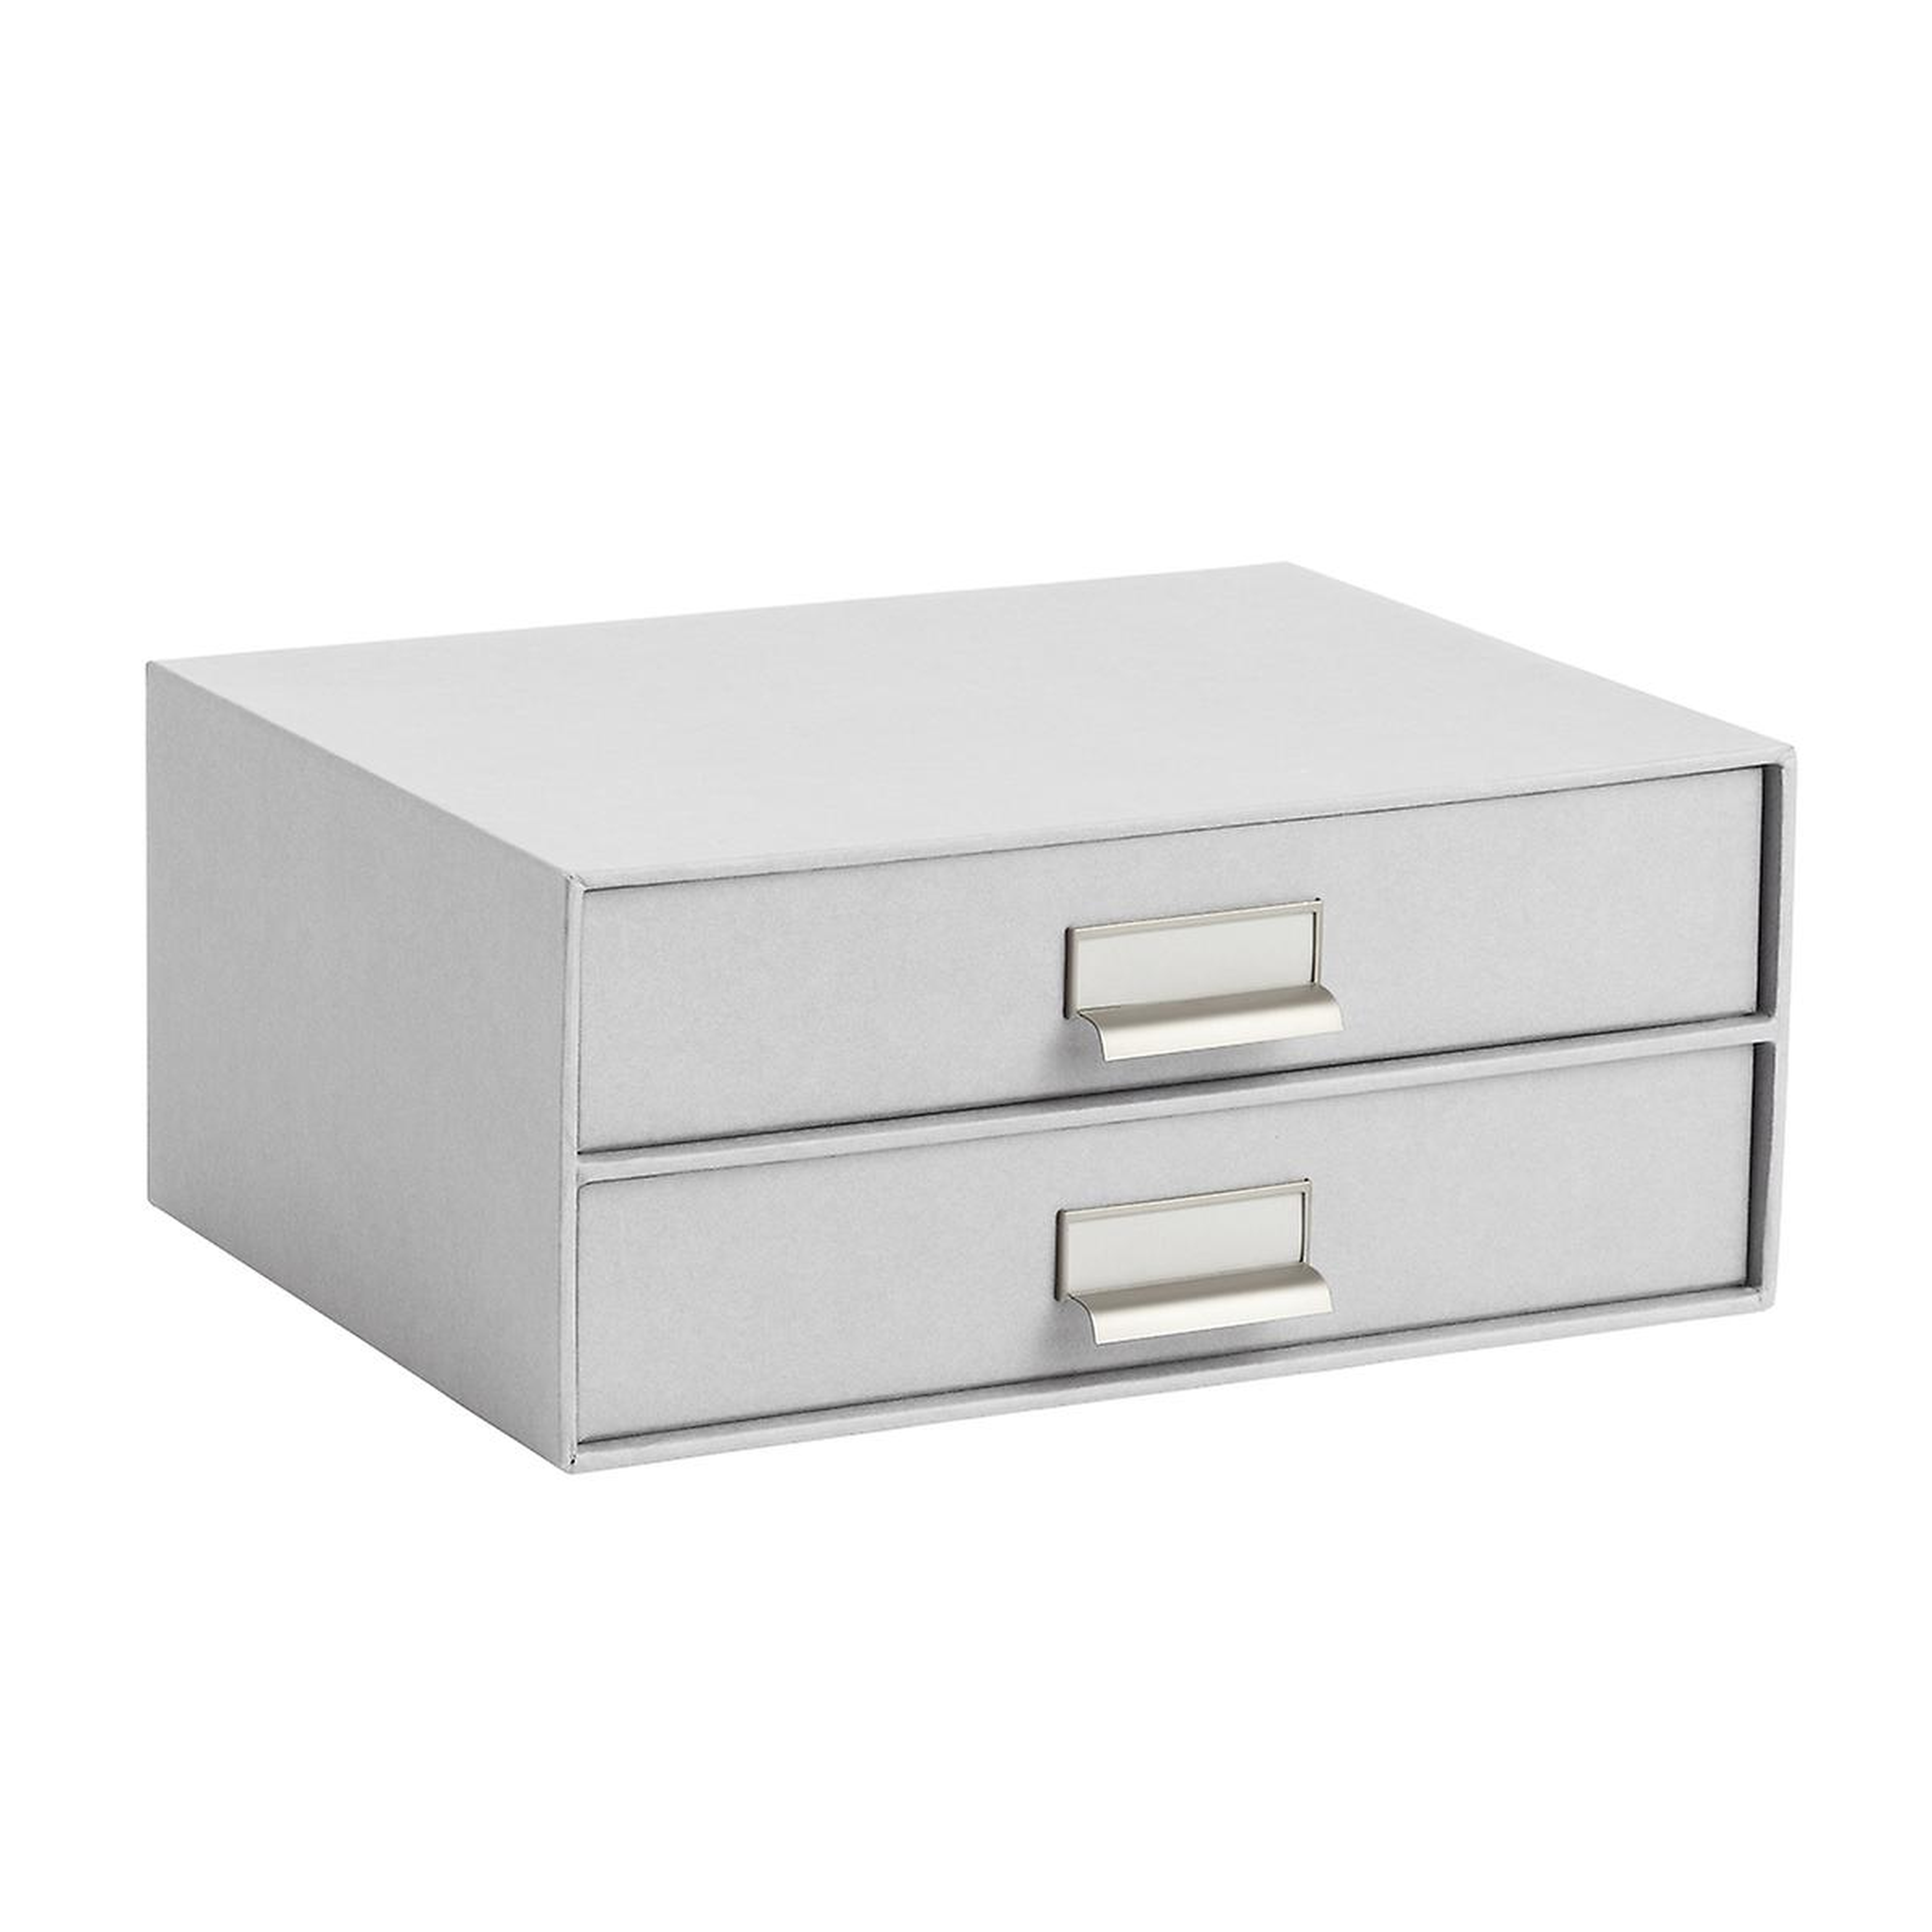 Bigso Light Grey Stockholm Paper Drawers - containerstore.com